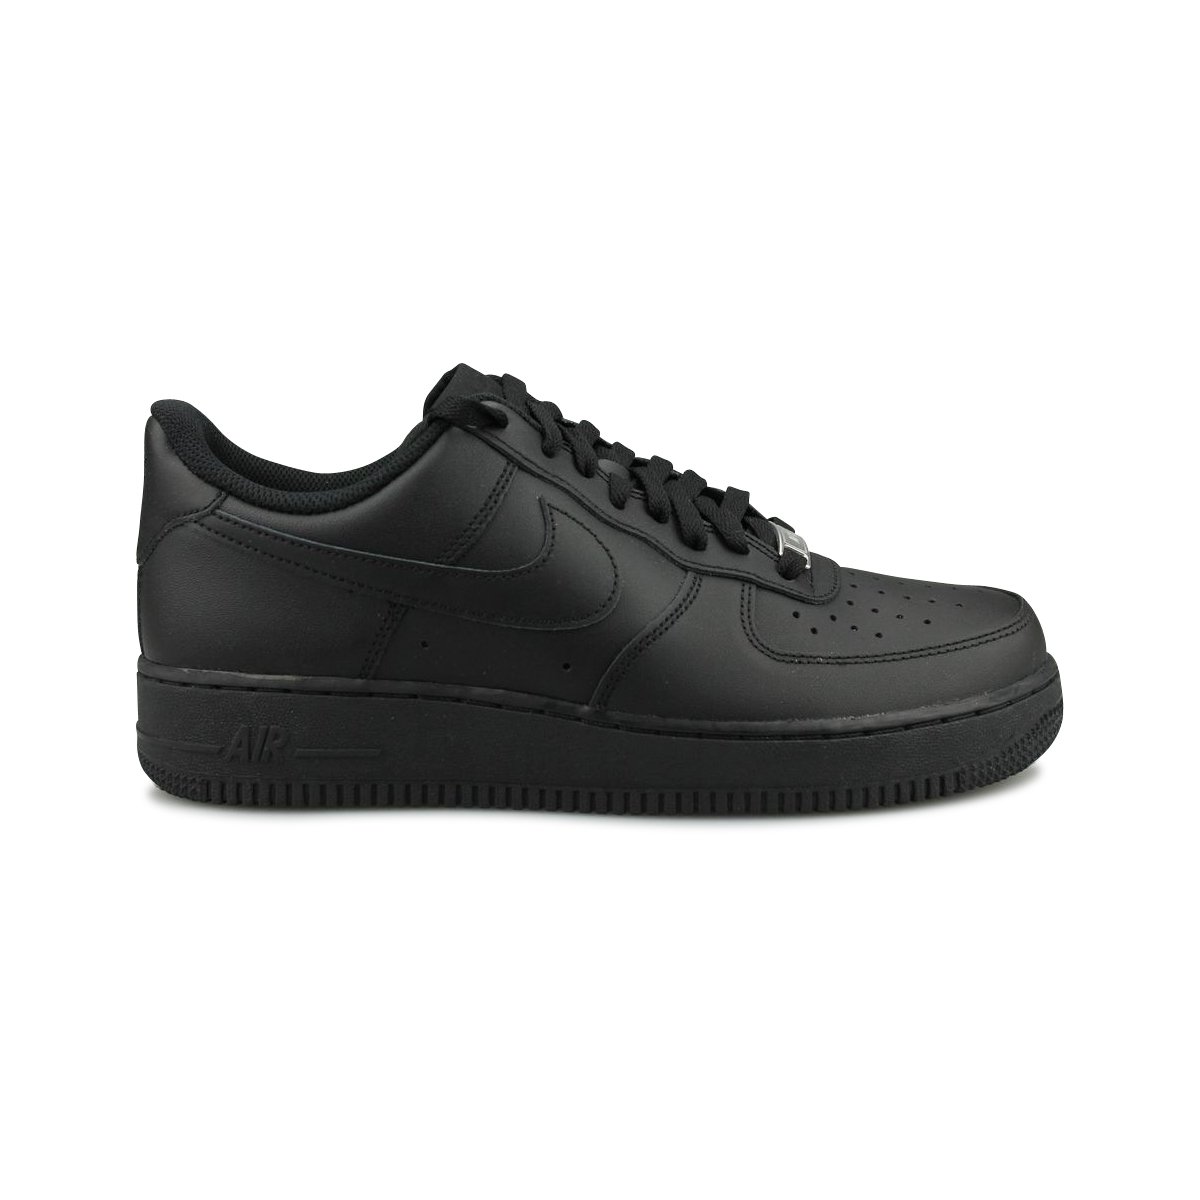 Nike Unisex Adult Air Force 1 '07' Low-Top